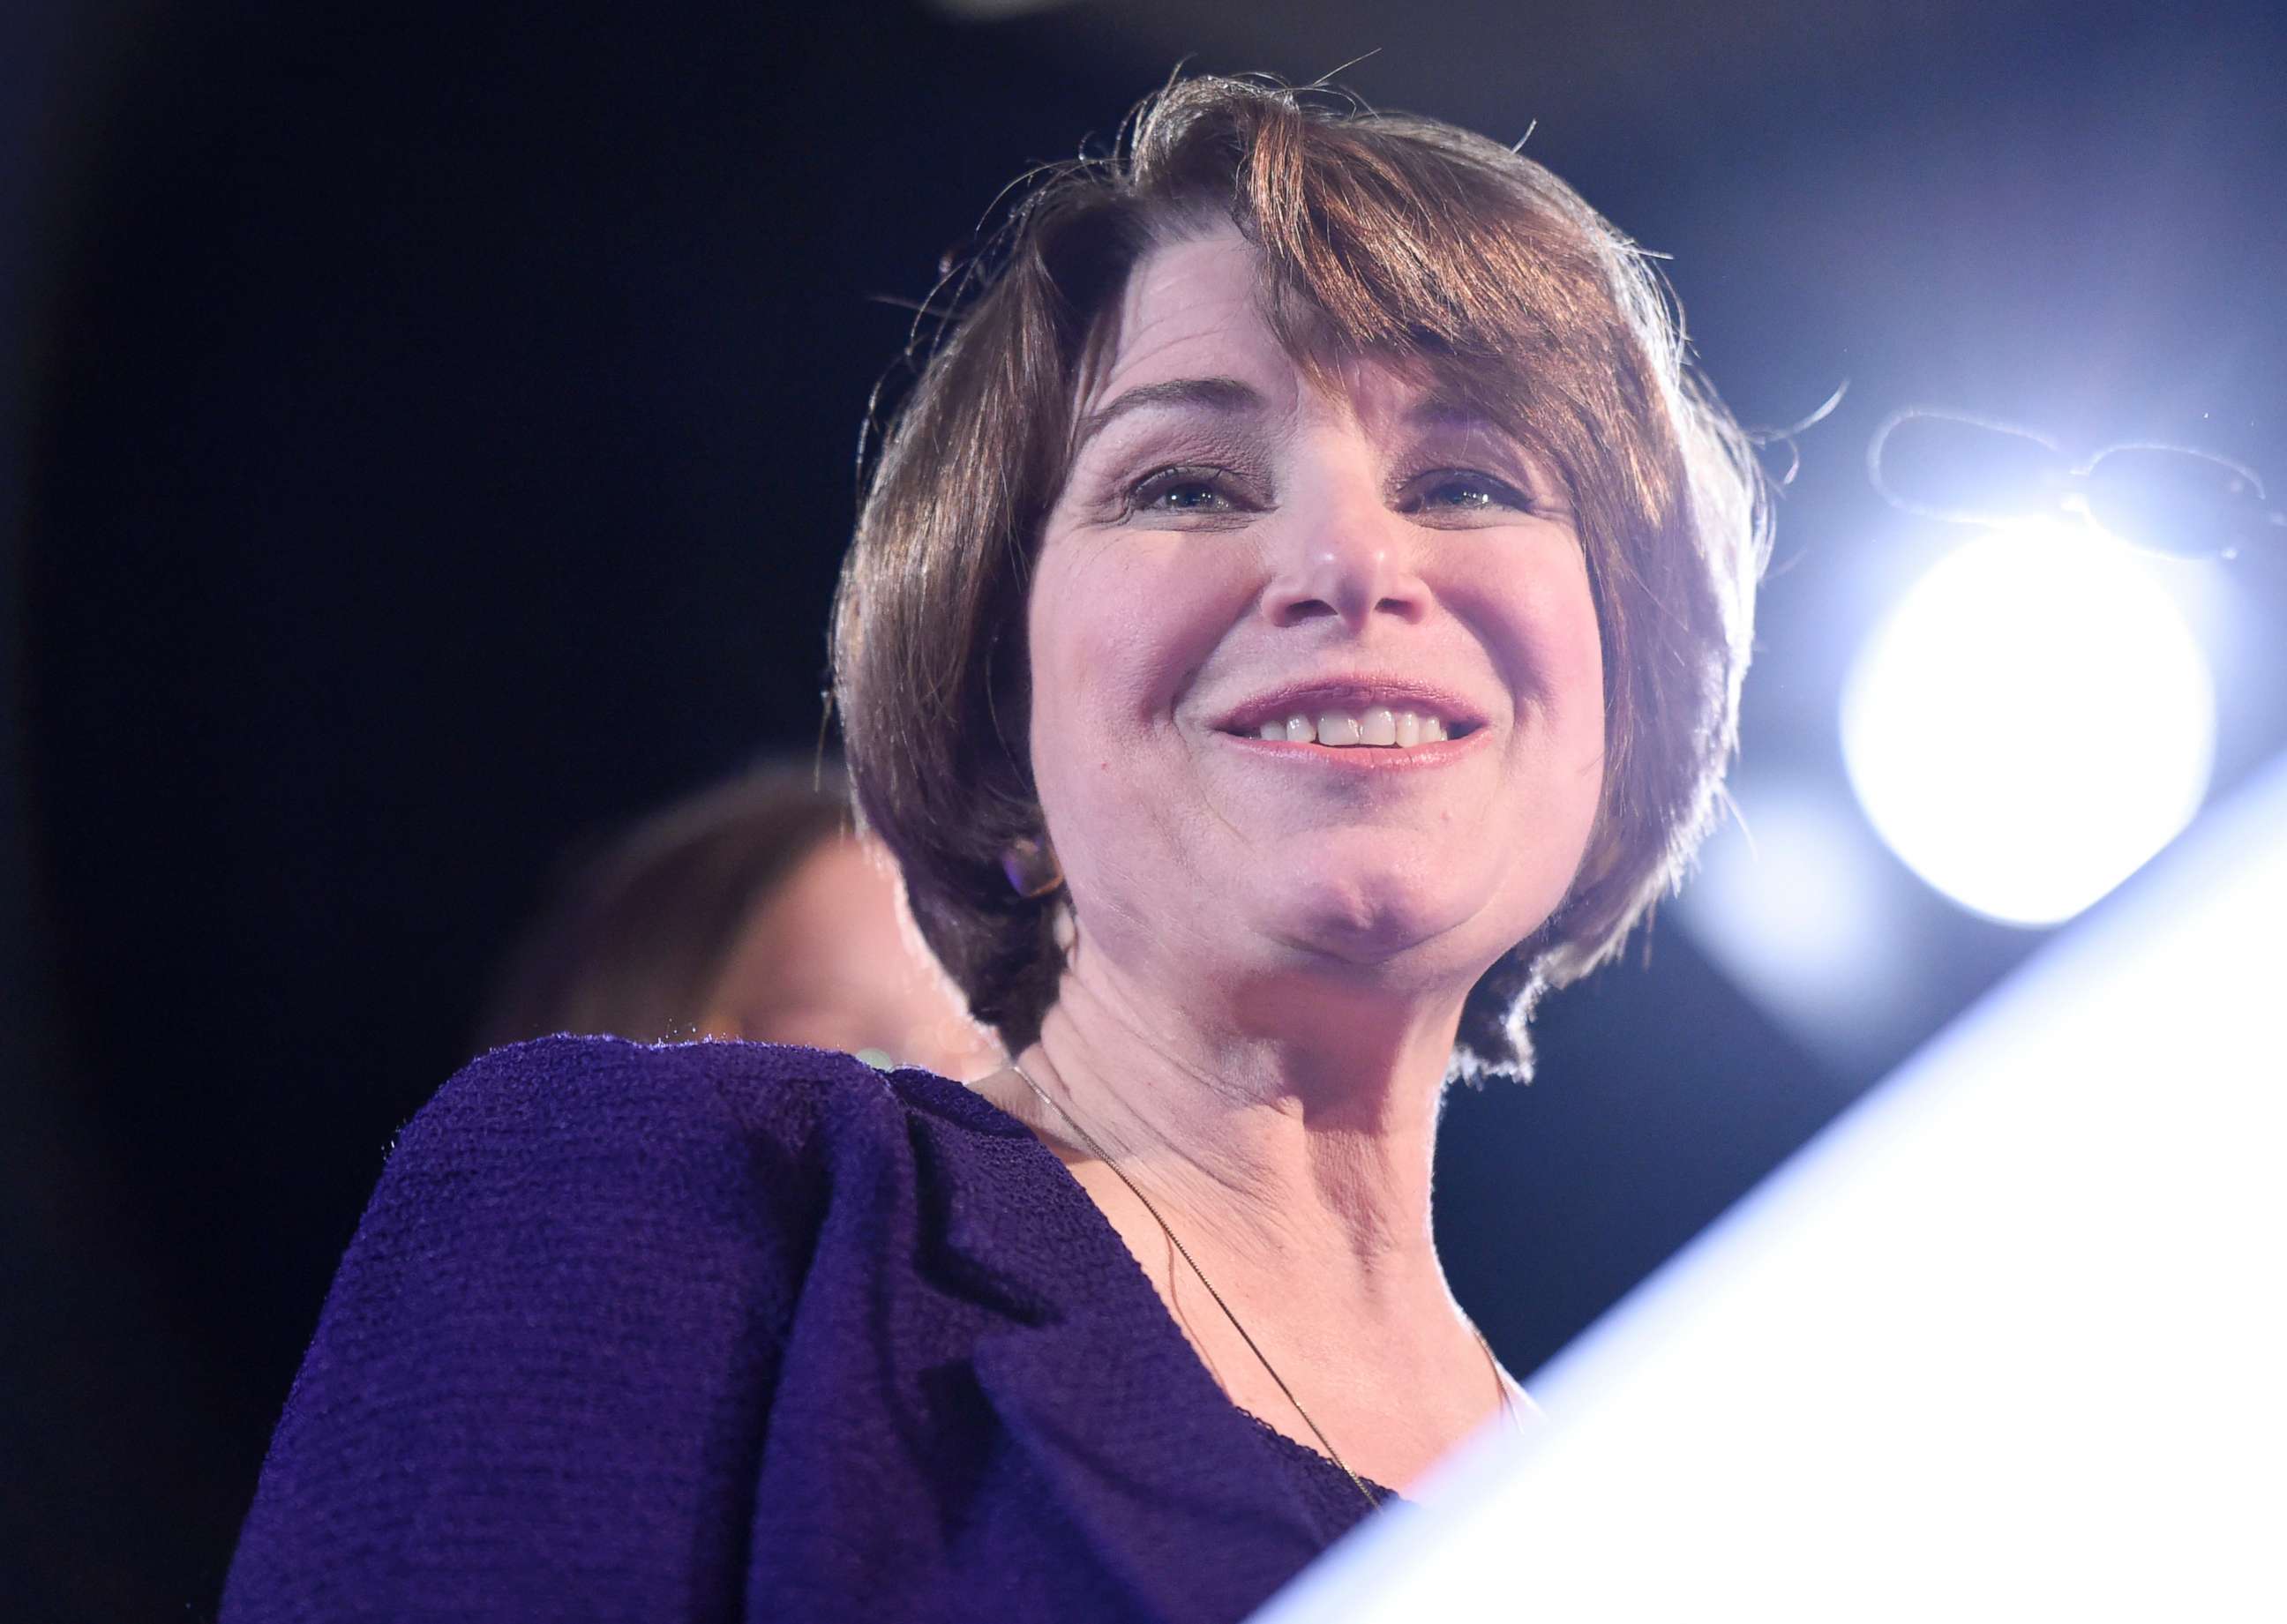 PHOTO: Sen. Amy Klobuchar, D-Minn., speaks after winning re-election during a election night event held by the Democratic Party, Nov. 6, 2018, in St. Paul, Minn.